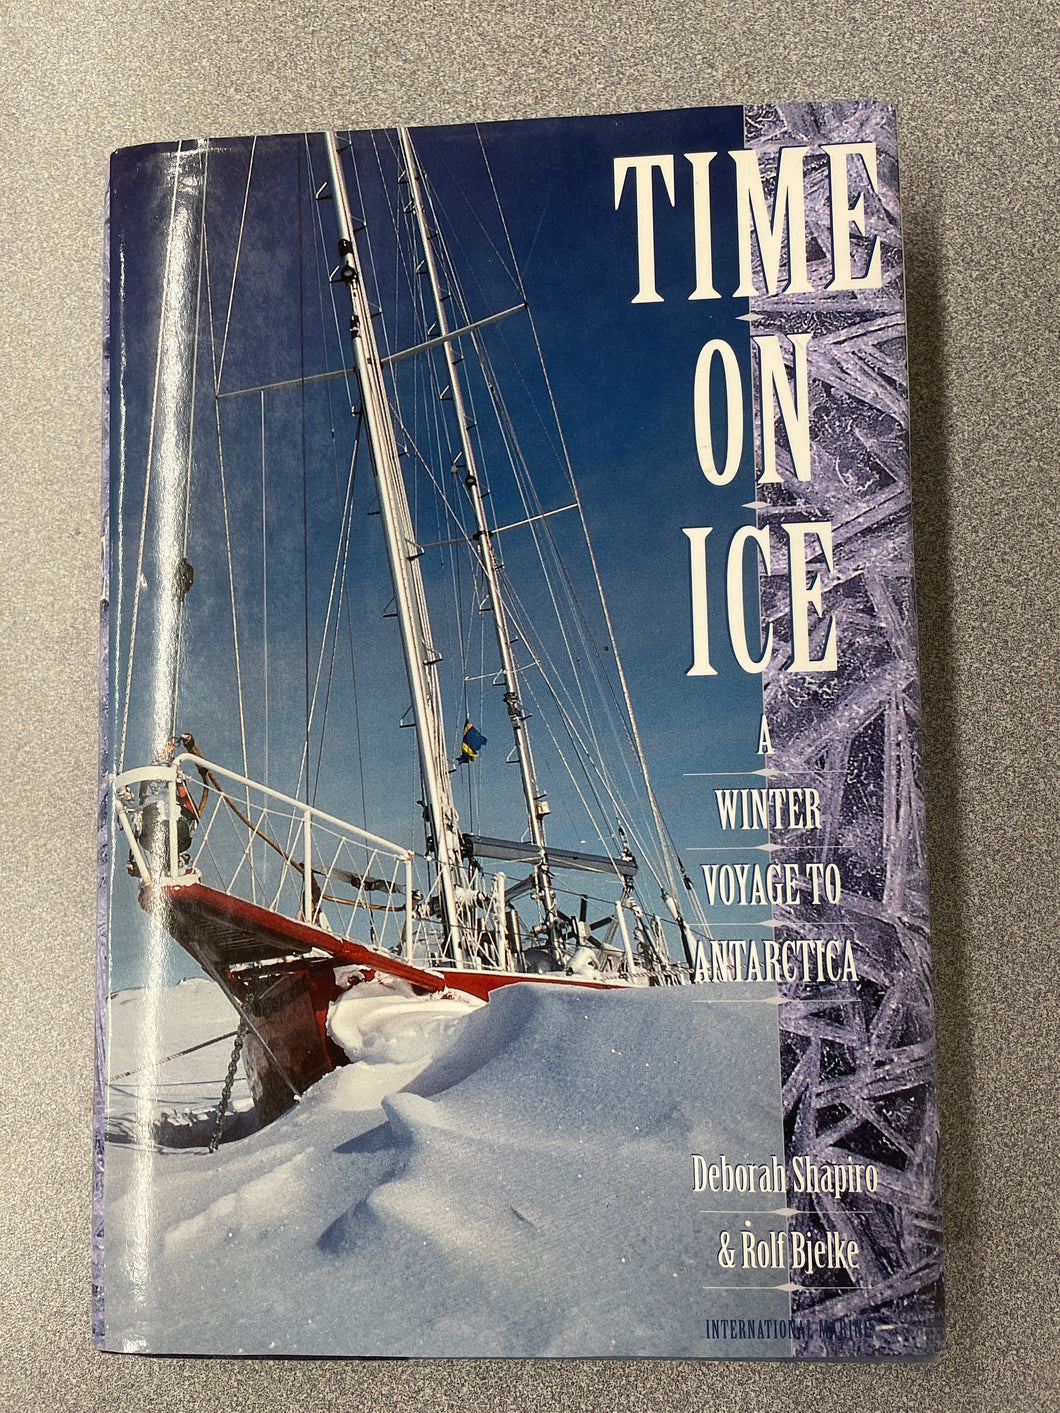 Time On Ice: A Winter Voyage to Antarctica, Shapiro, Deborah and Rolf Bjelke [1998] OU 4/24